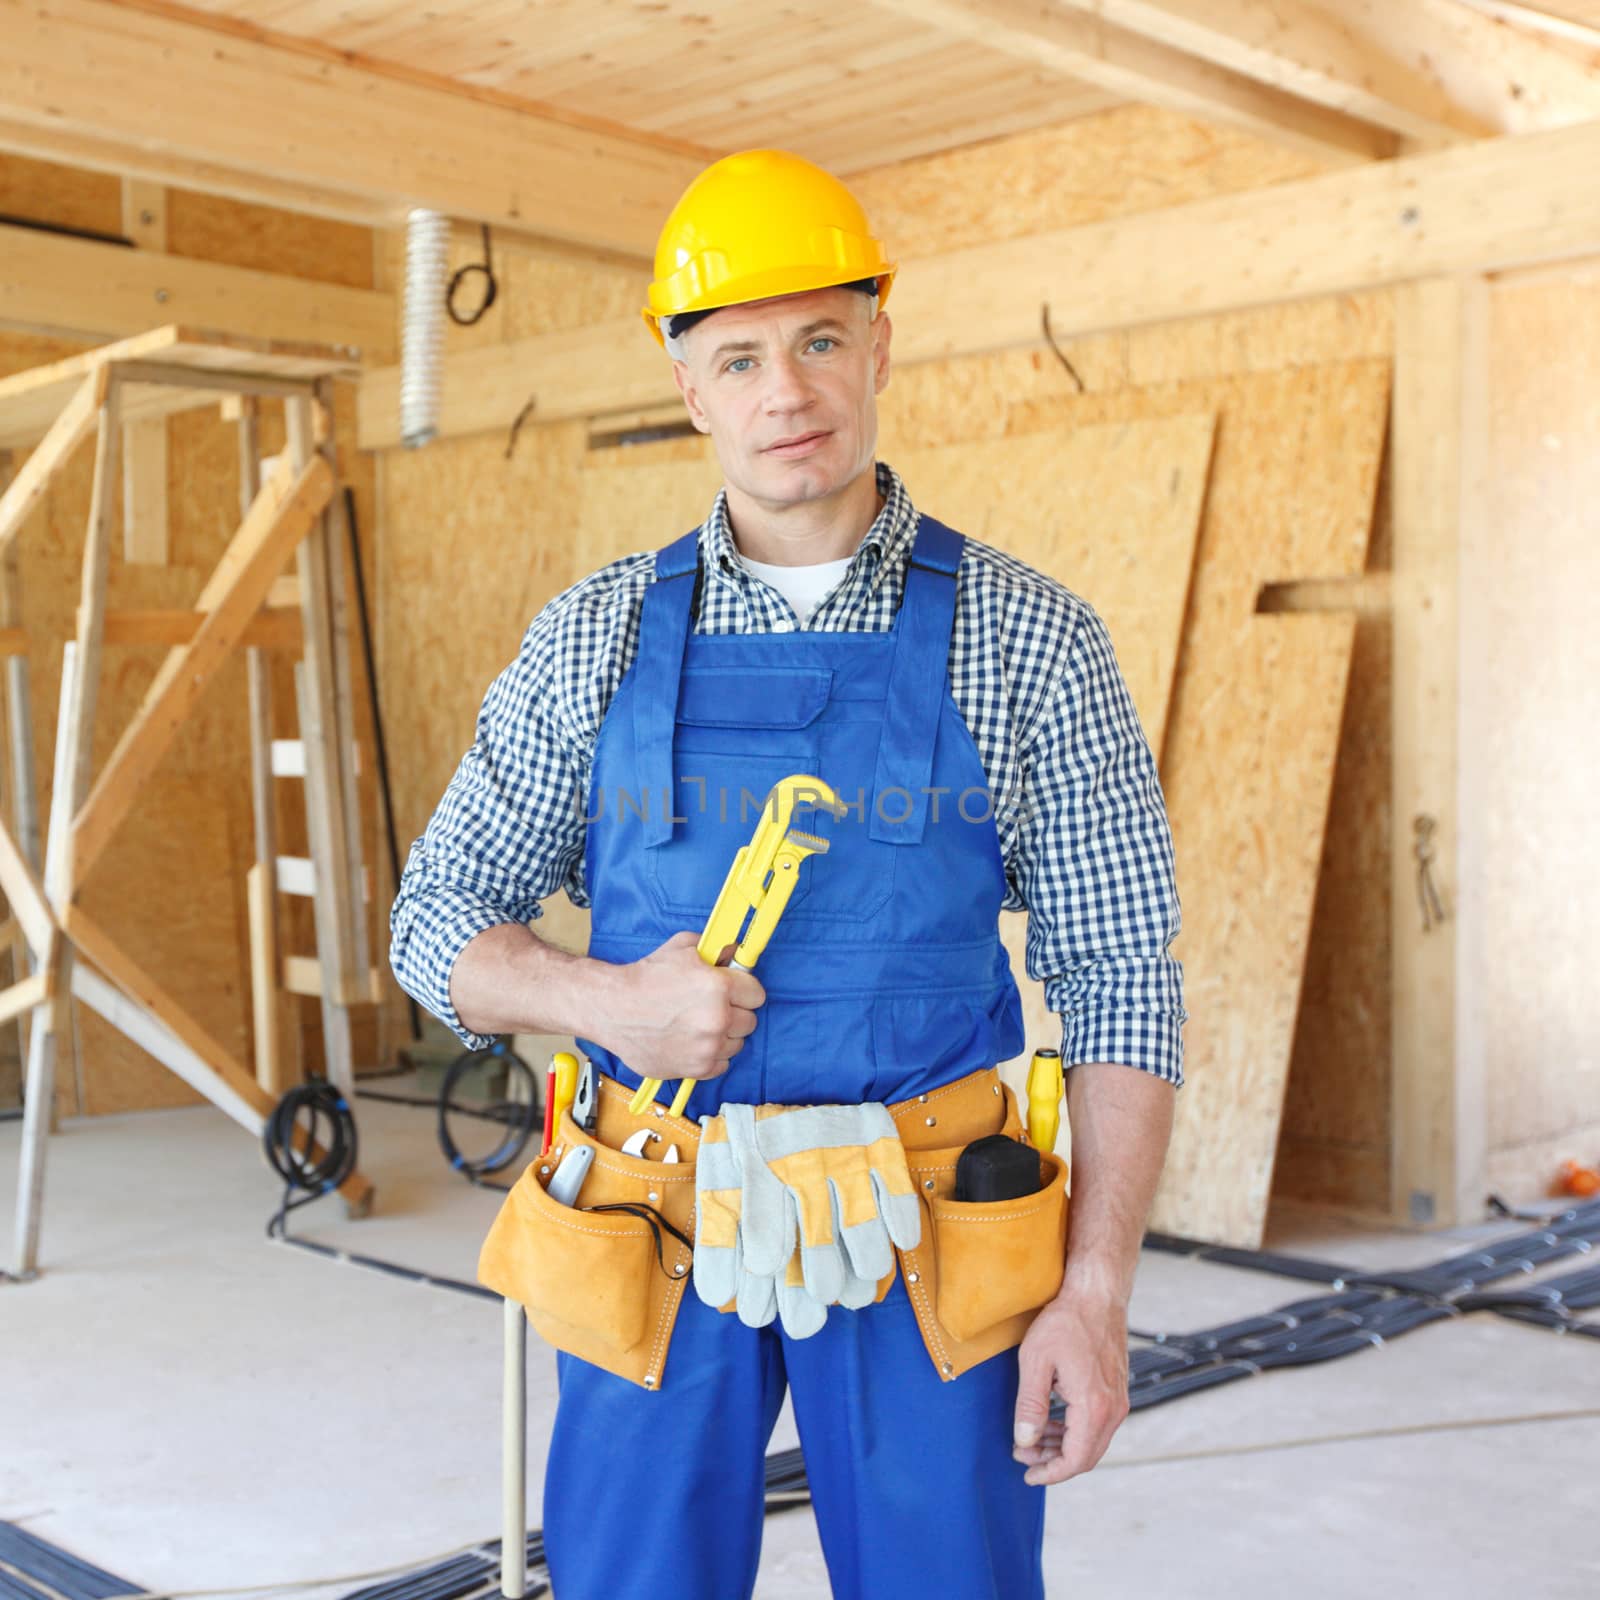 Workman with wrench inside wooden house under construction